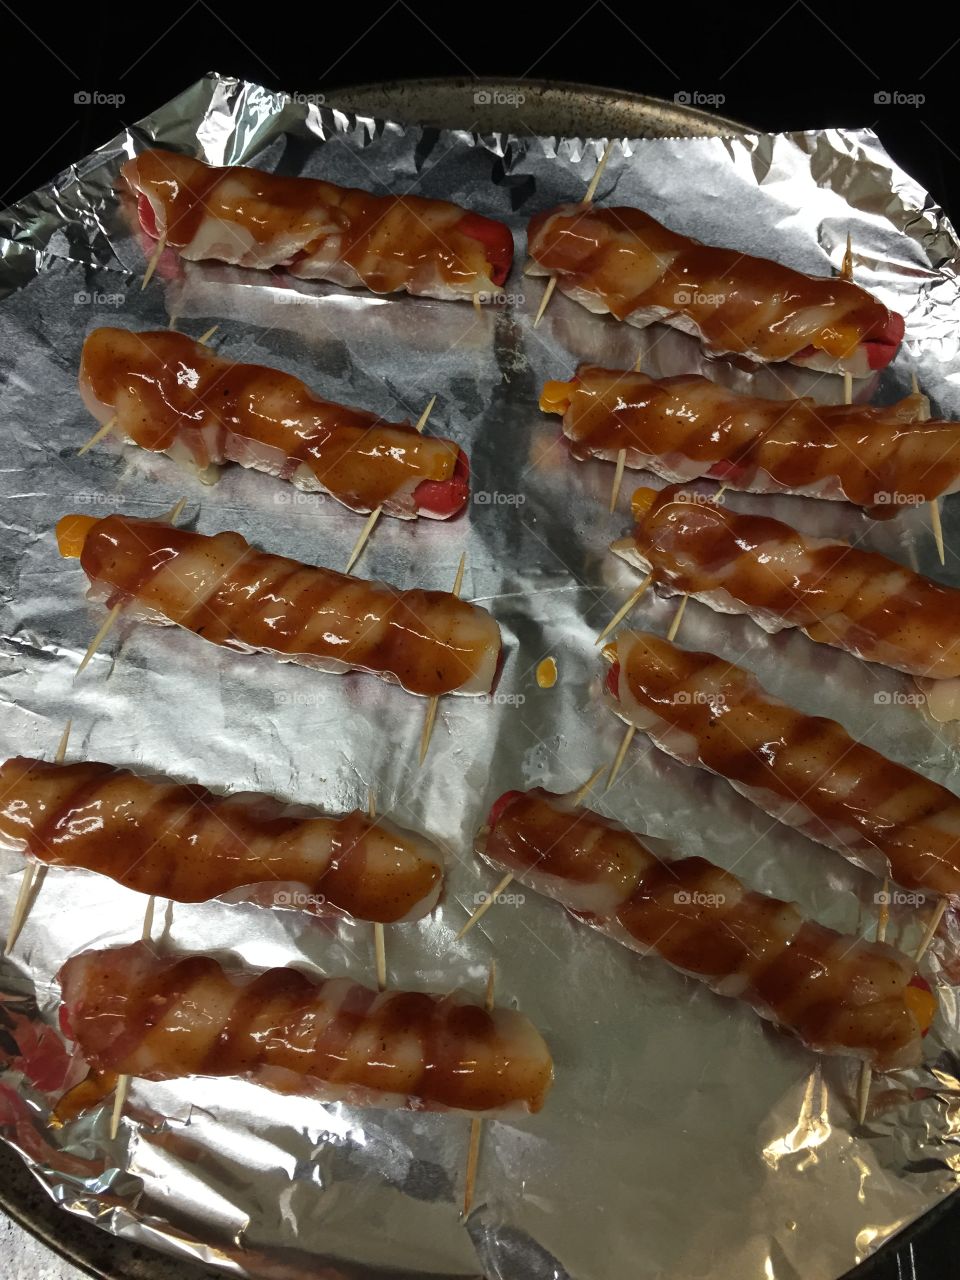 Bacon wrapped wieners!. New recipe off Pinterest we tried! They tasted as good as they look!